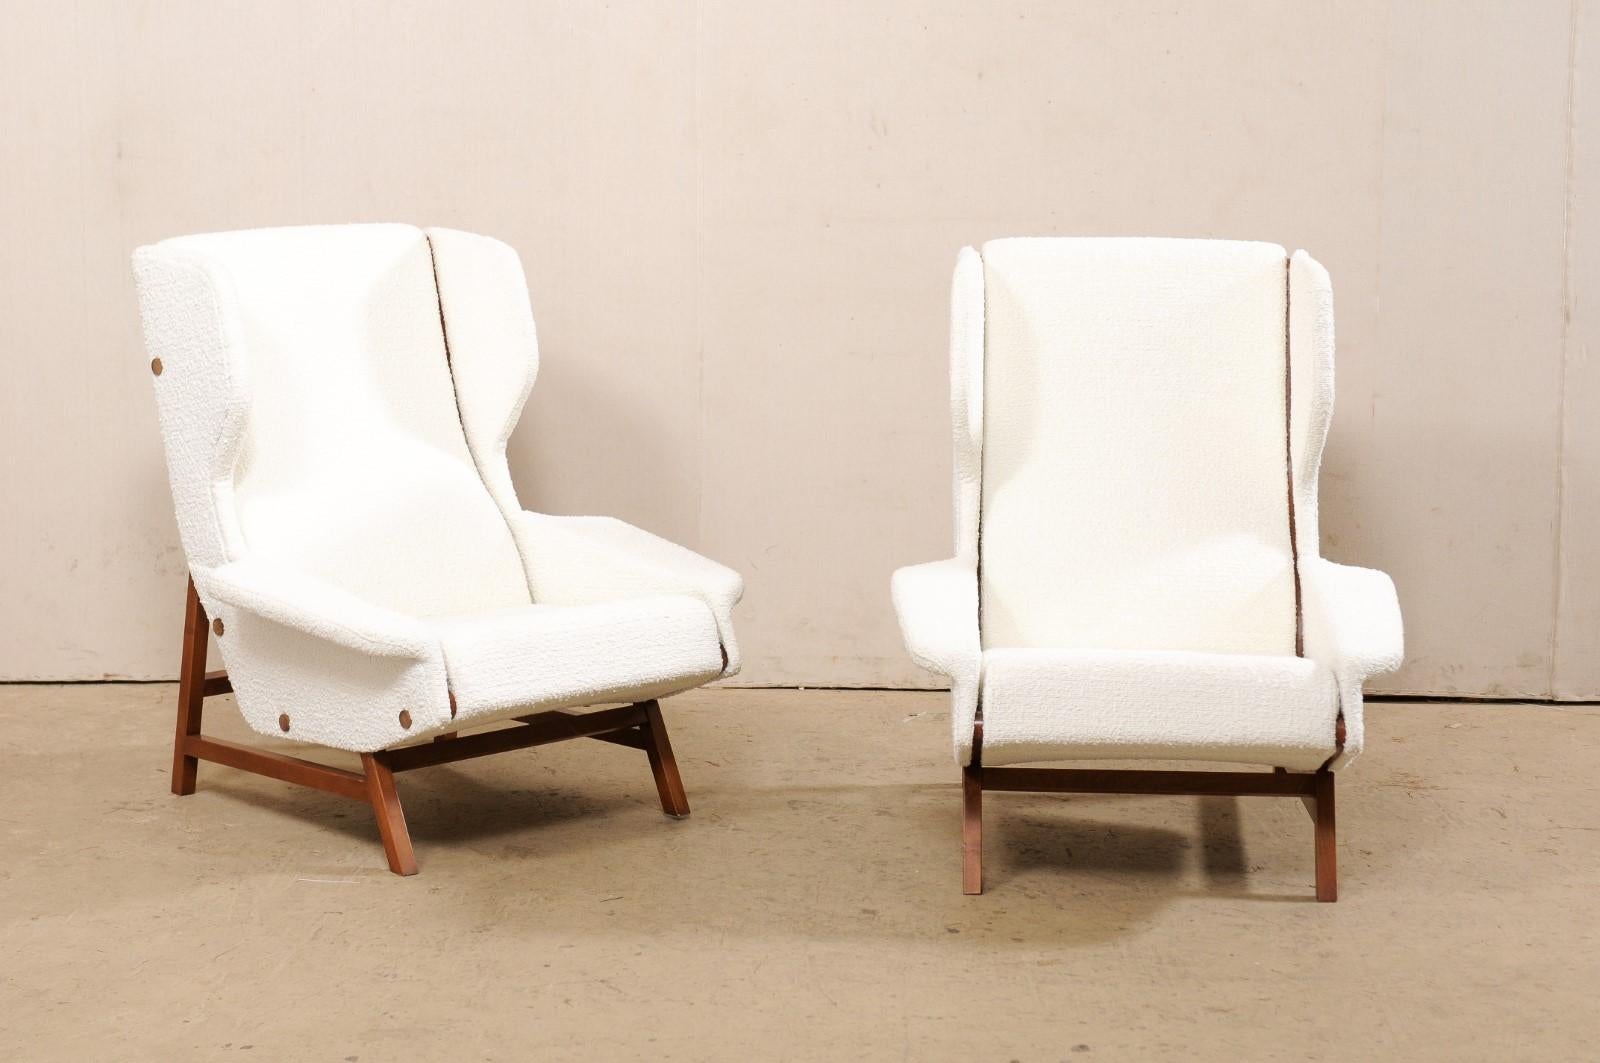 An Italian pair of nicely-sized and modern-designed upholstered wingback chairs in white. This pair of mid-century inspired club chairs from Italy each feature tall, tilted, rectangular backs with forward facing wings at top, generously oversized